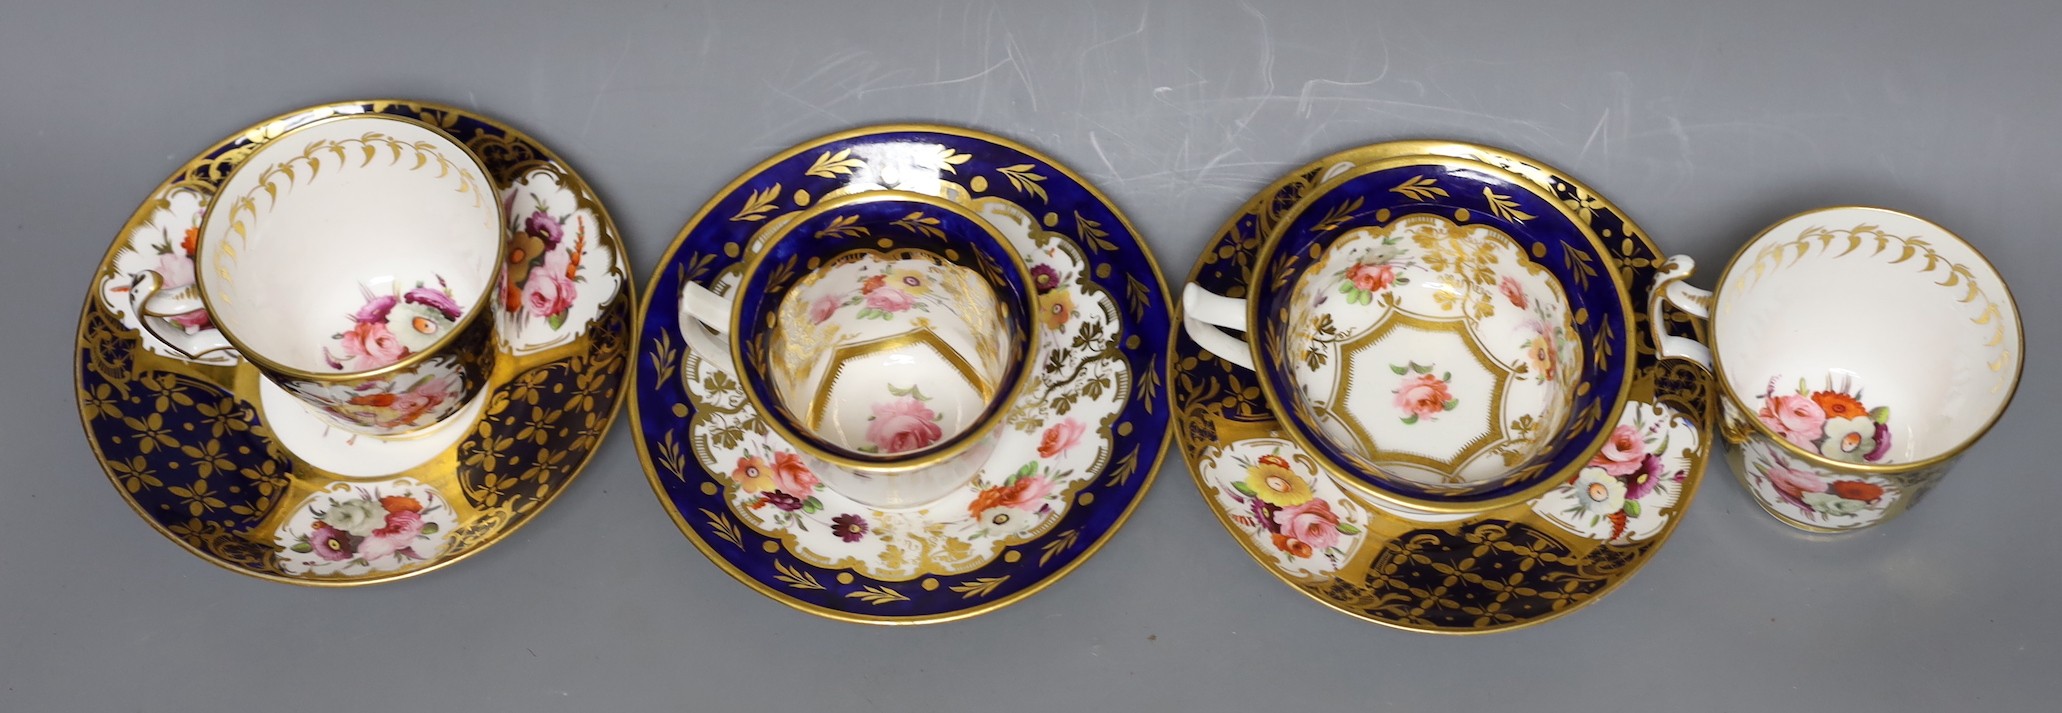 An early 19th century pair of Coalport coffee cups and saucer painted with pattern 793 and a New - Image 3 of 6